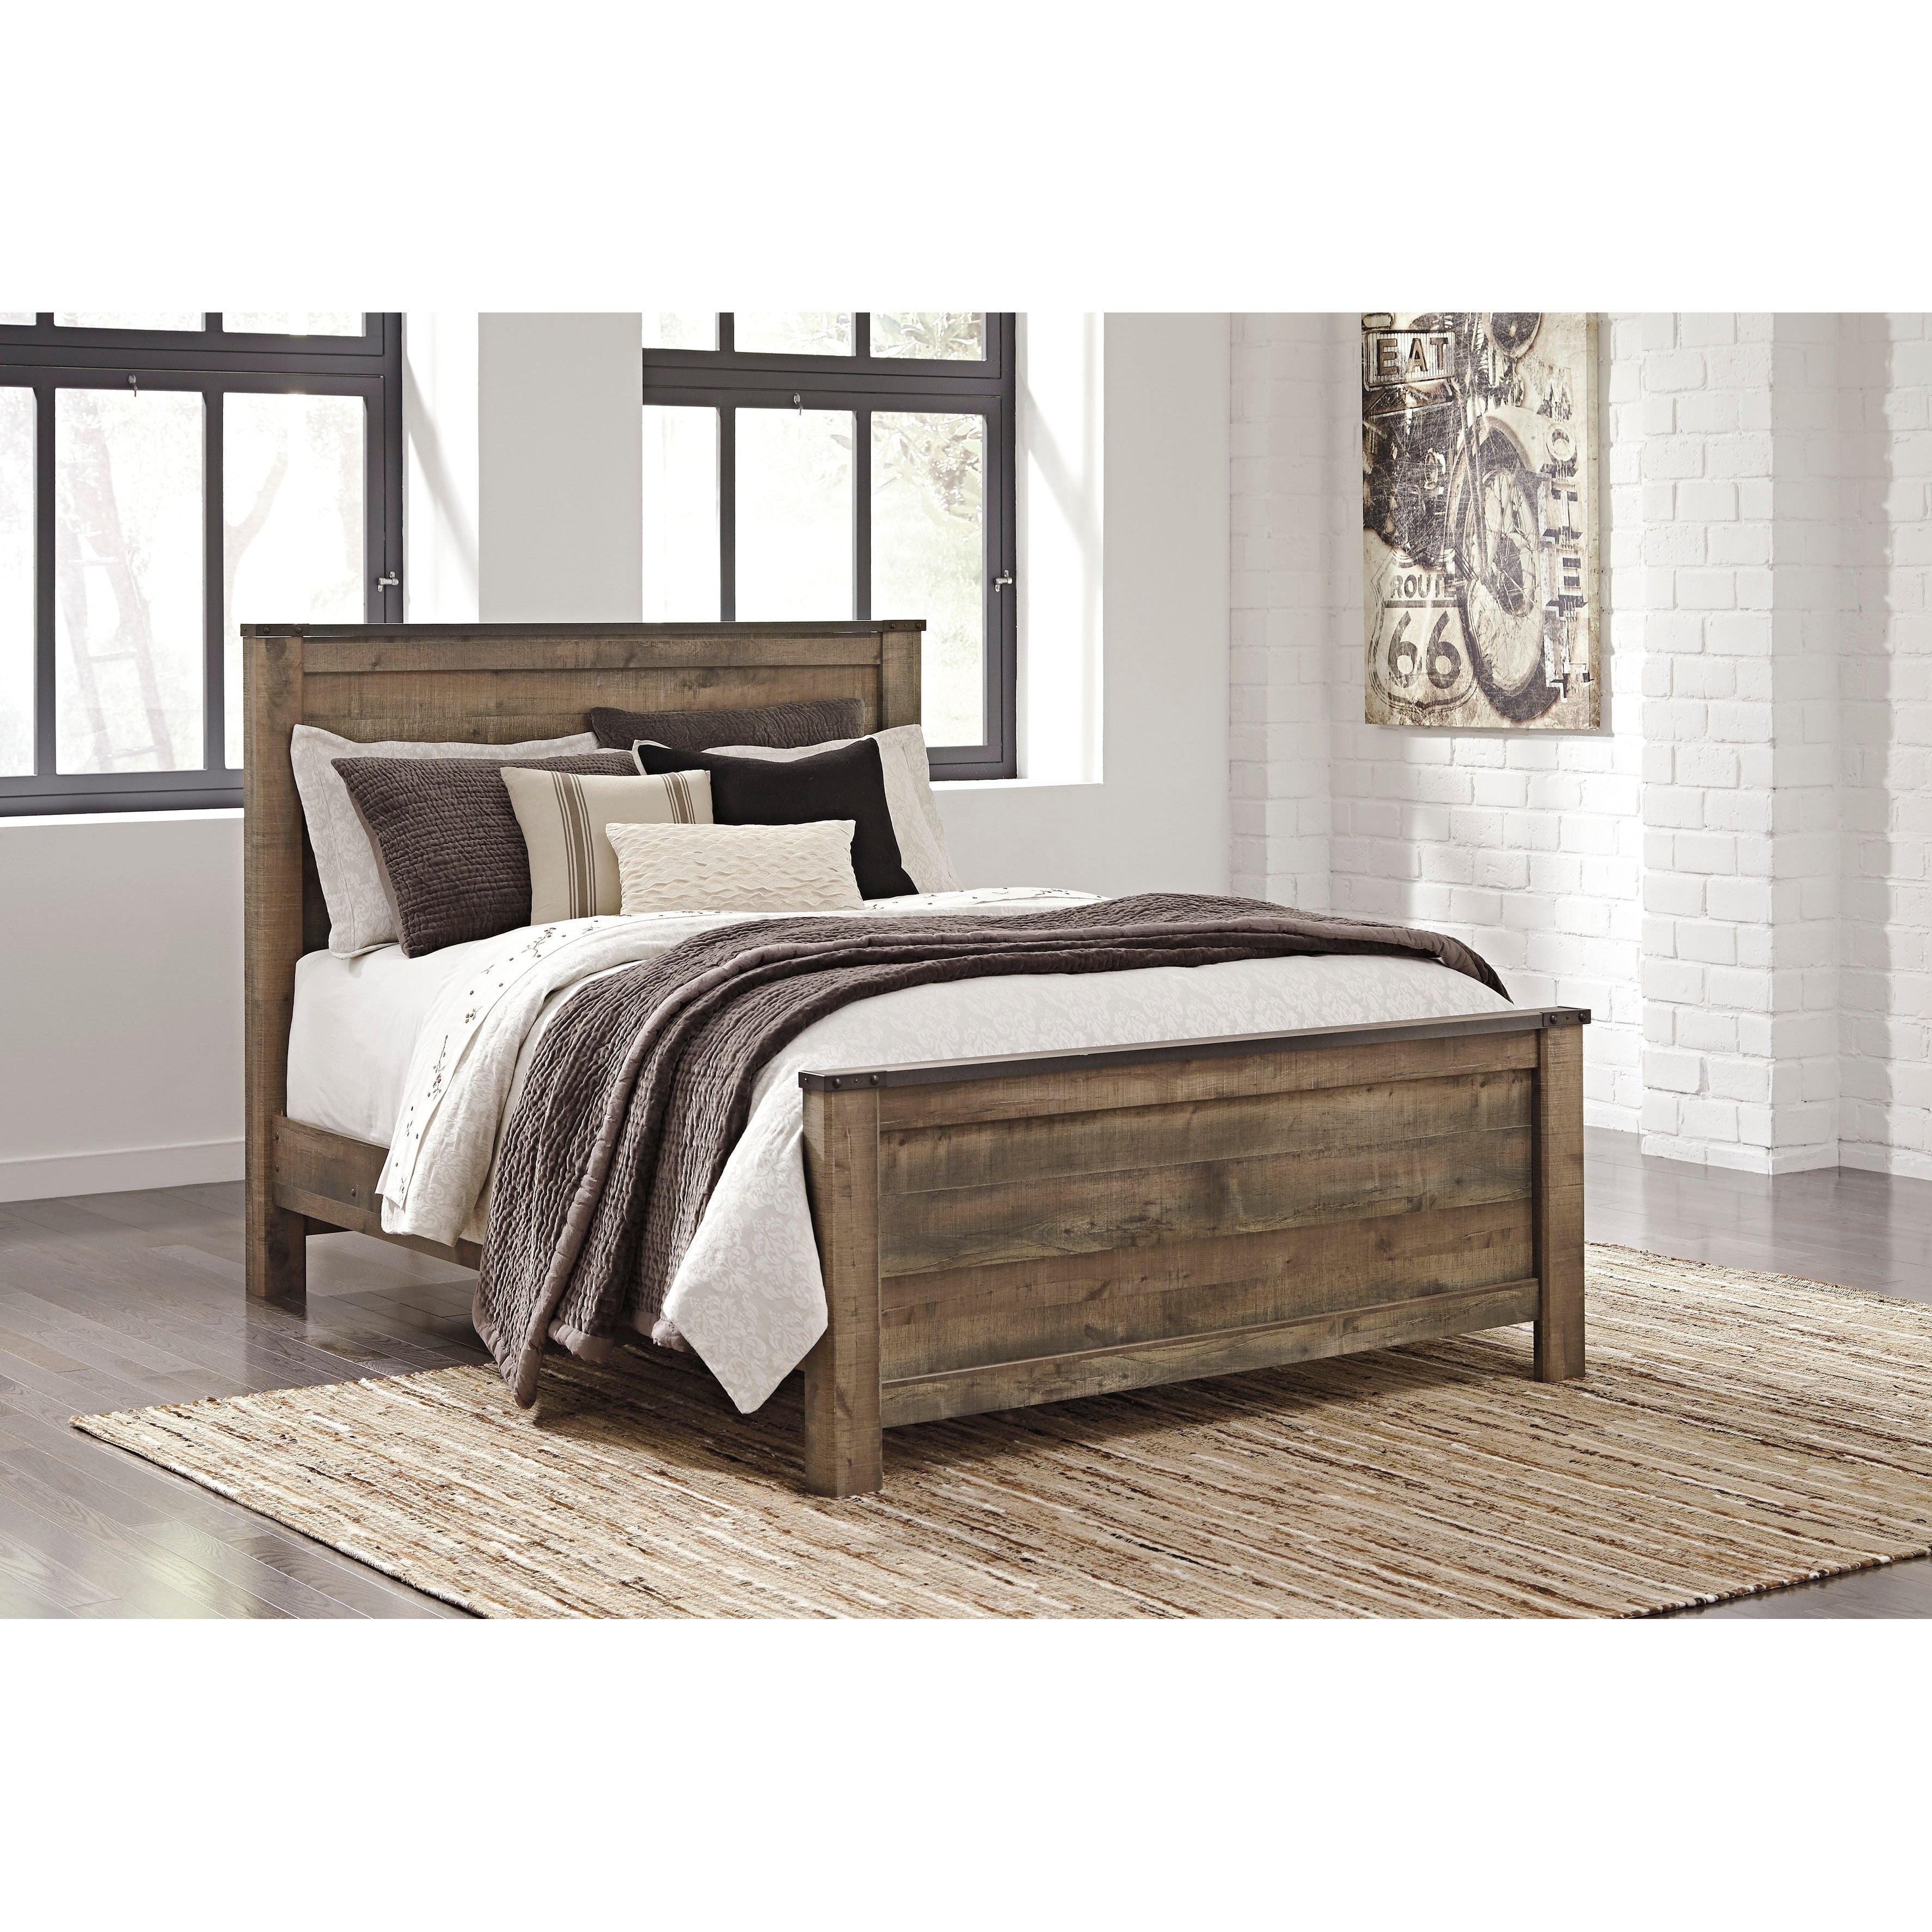 Trinell 4pc Bedroom Set